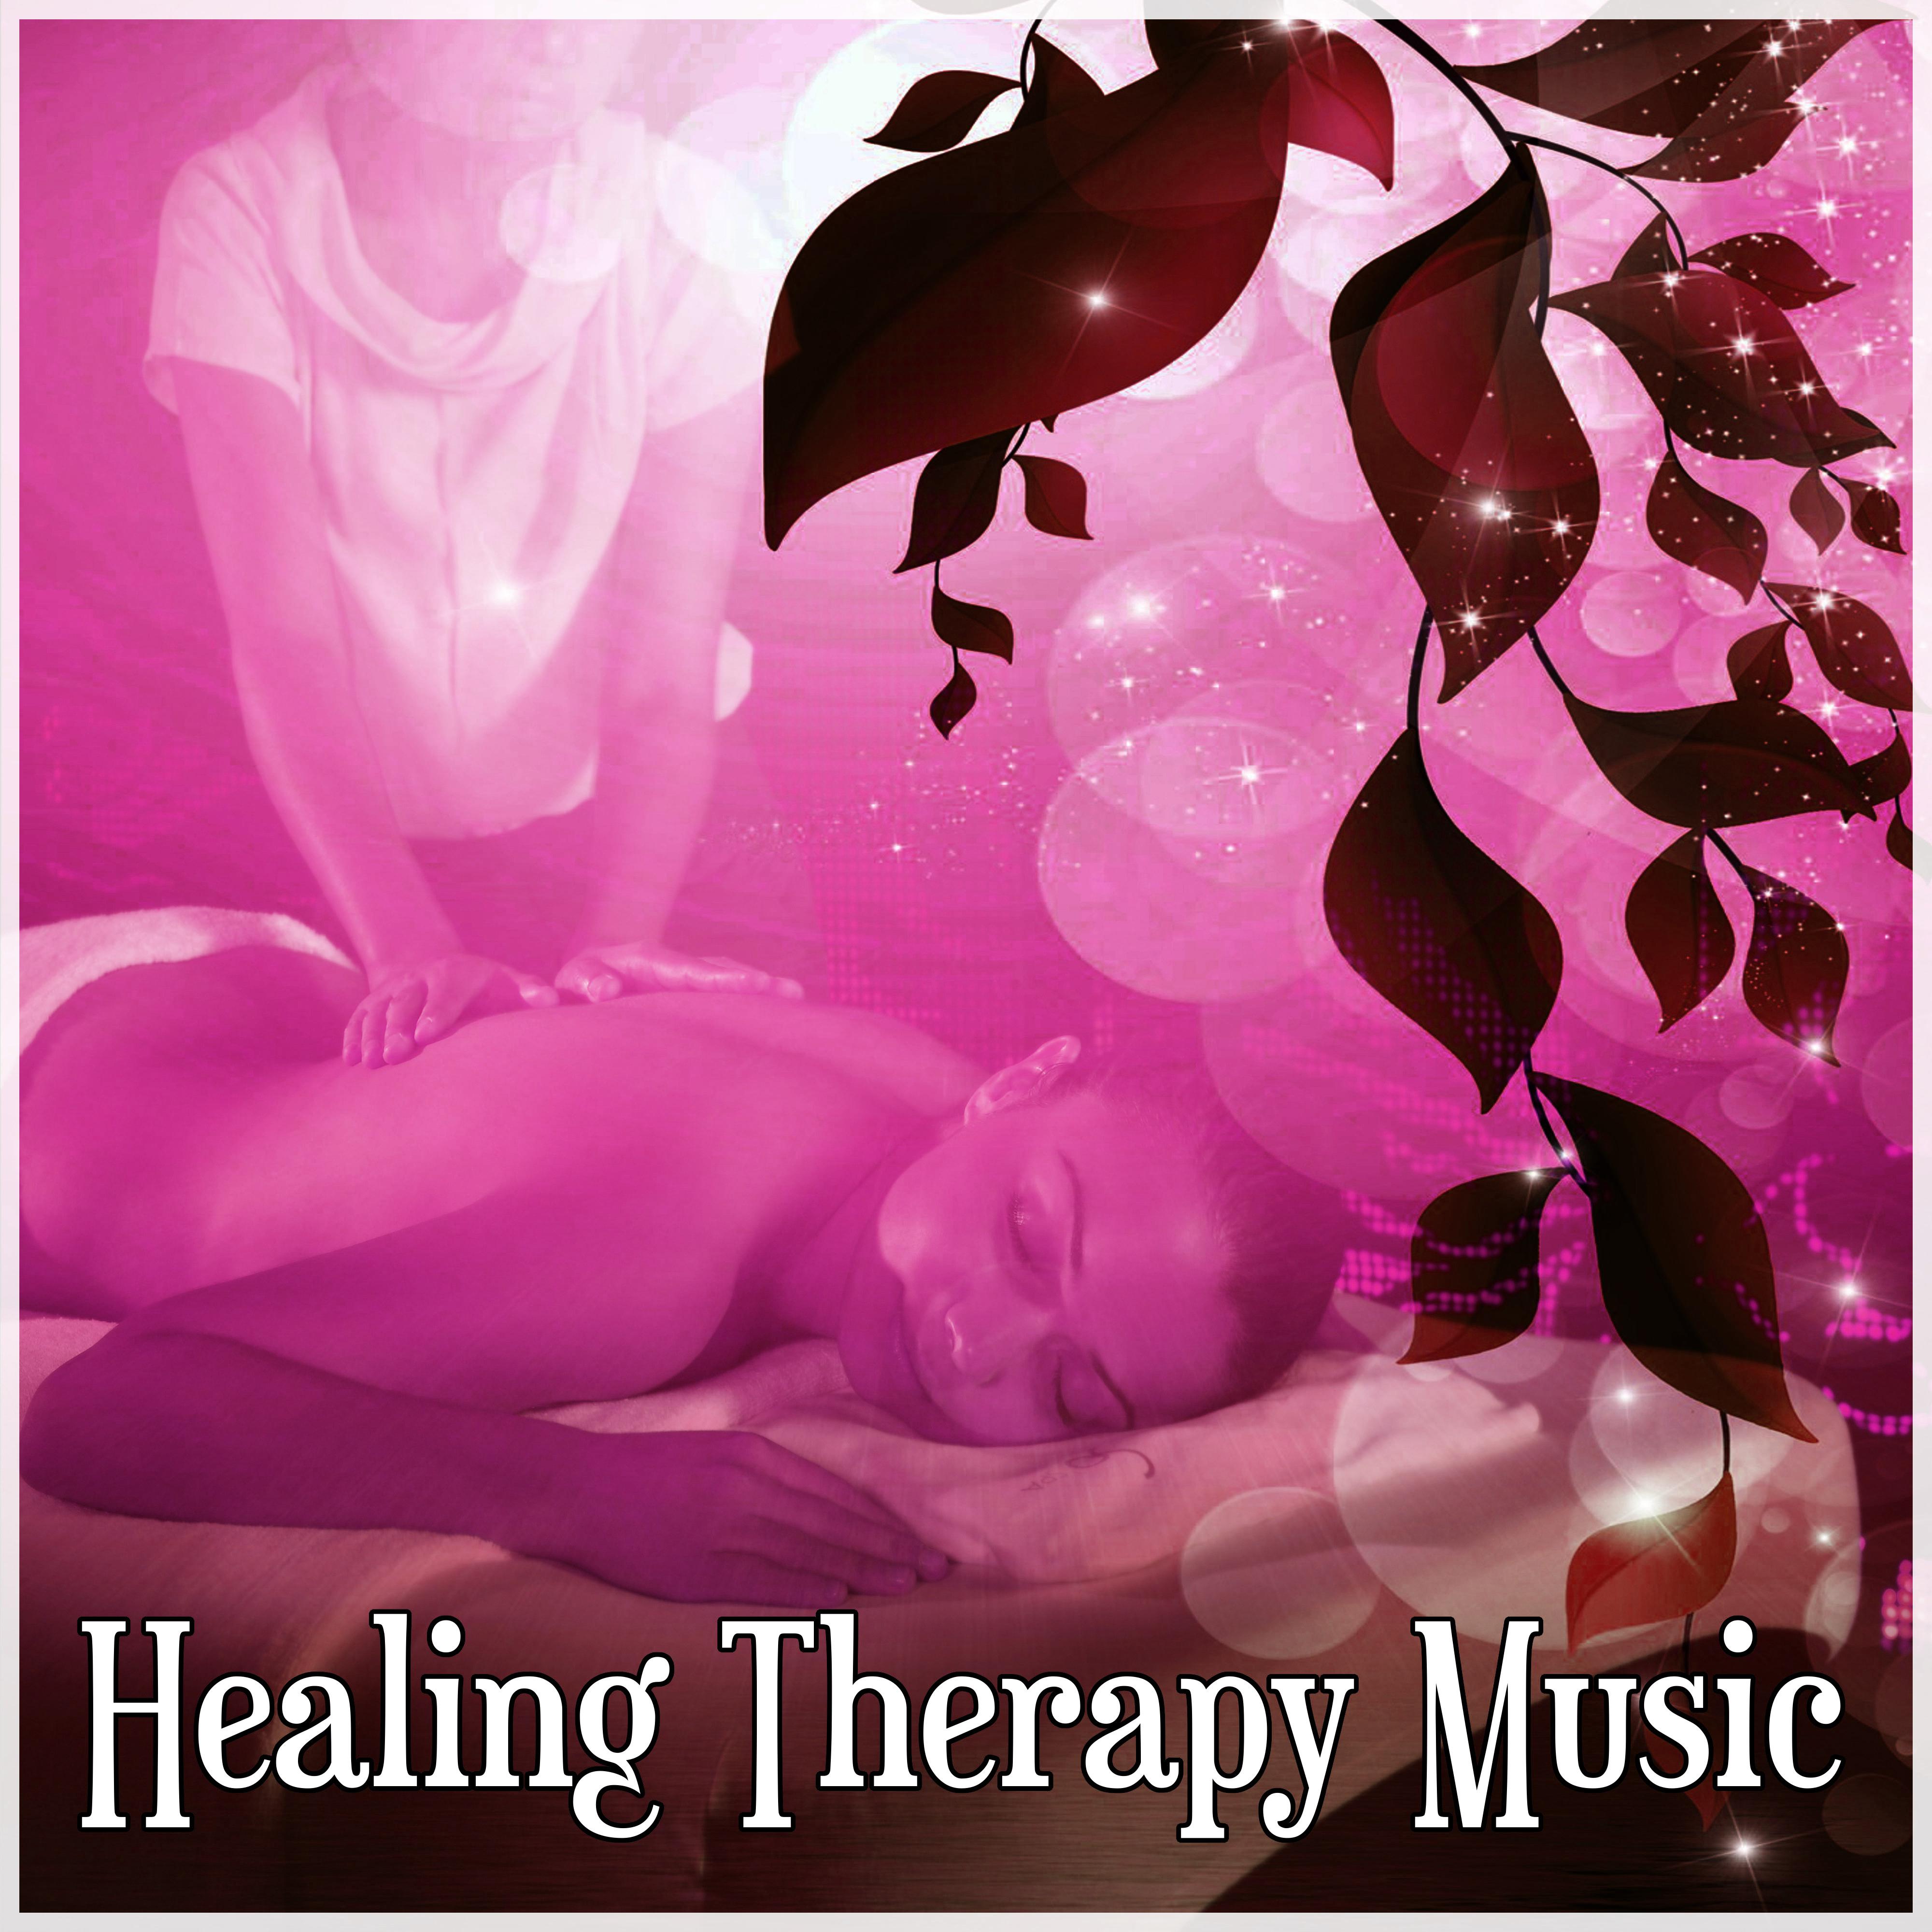 Healing Therapy Music  Healing Music, Deep Therapy, Calmness, Total Relax, Nature Sounds